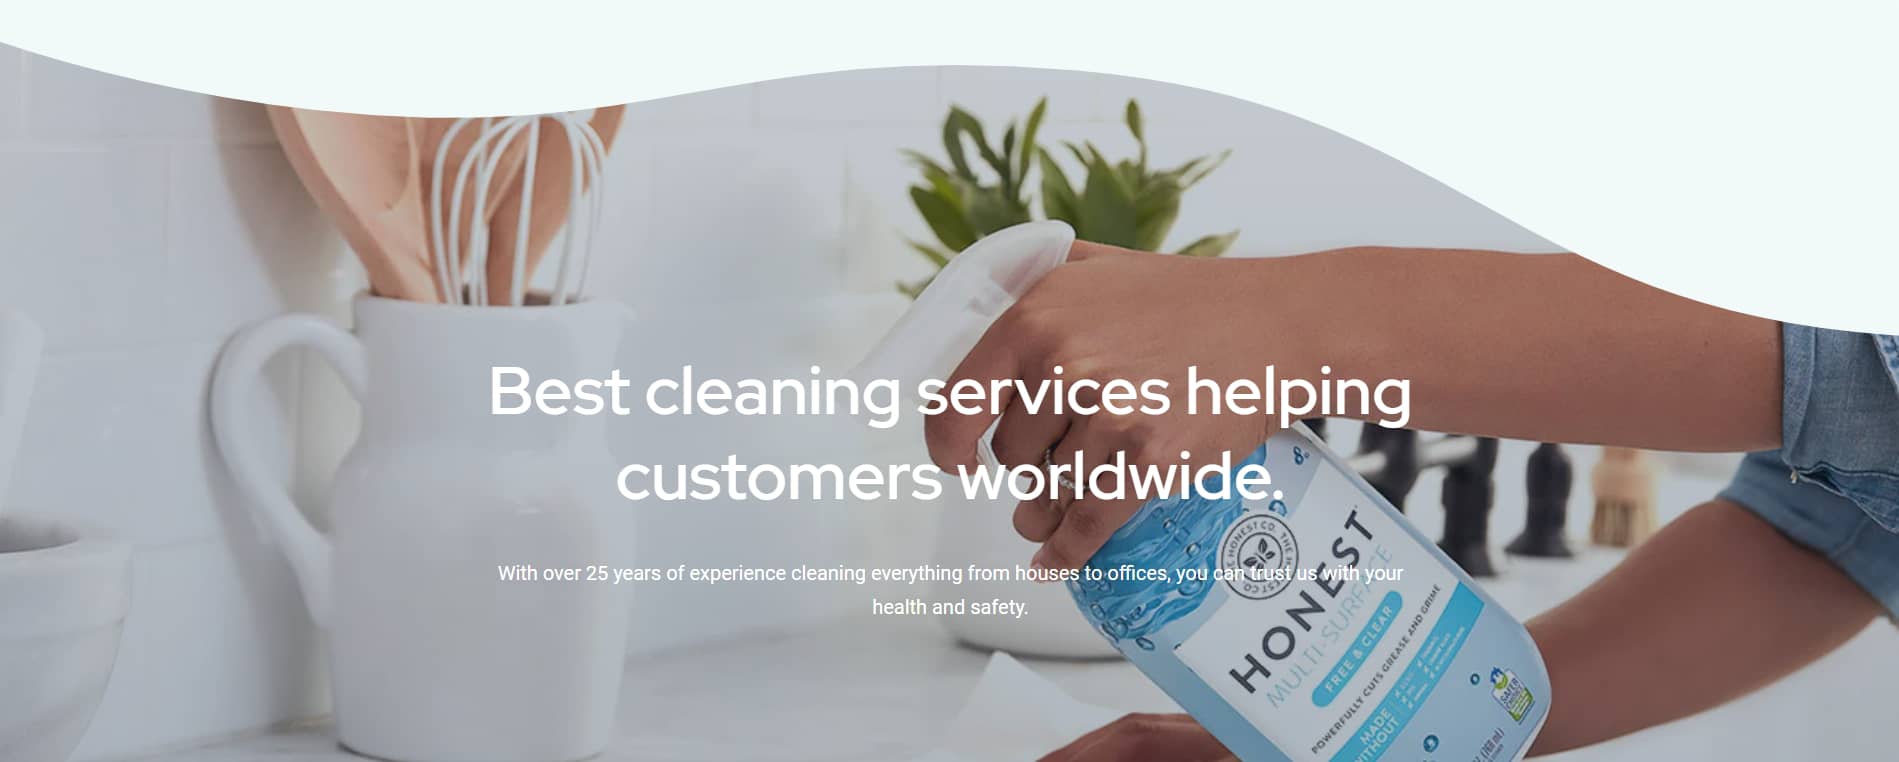 Avada Cleaning Services Visual CTA